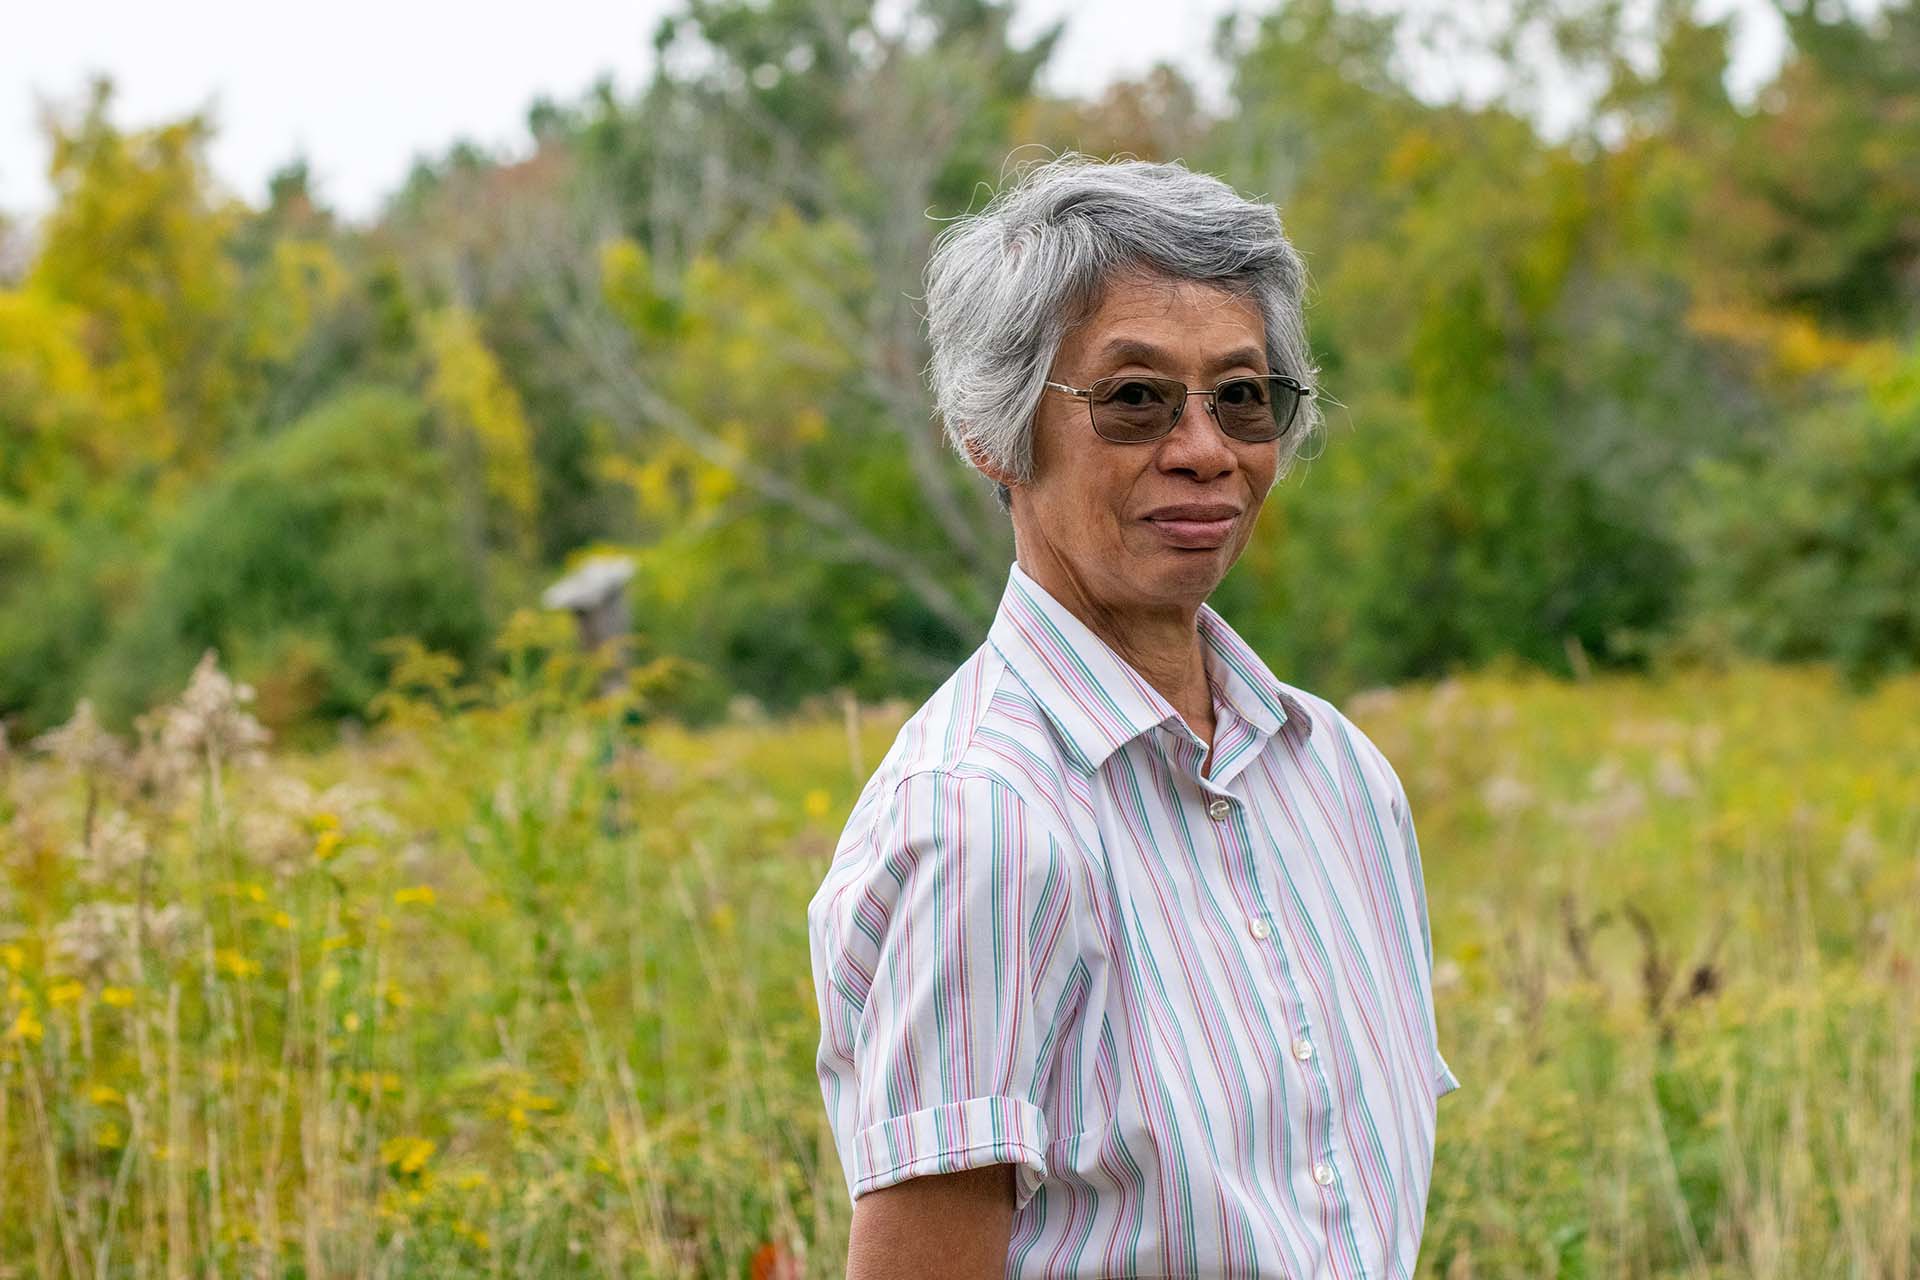 Woman with short gray hair and a button up shirt standing in a green meadow.